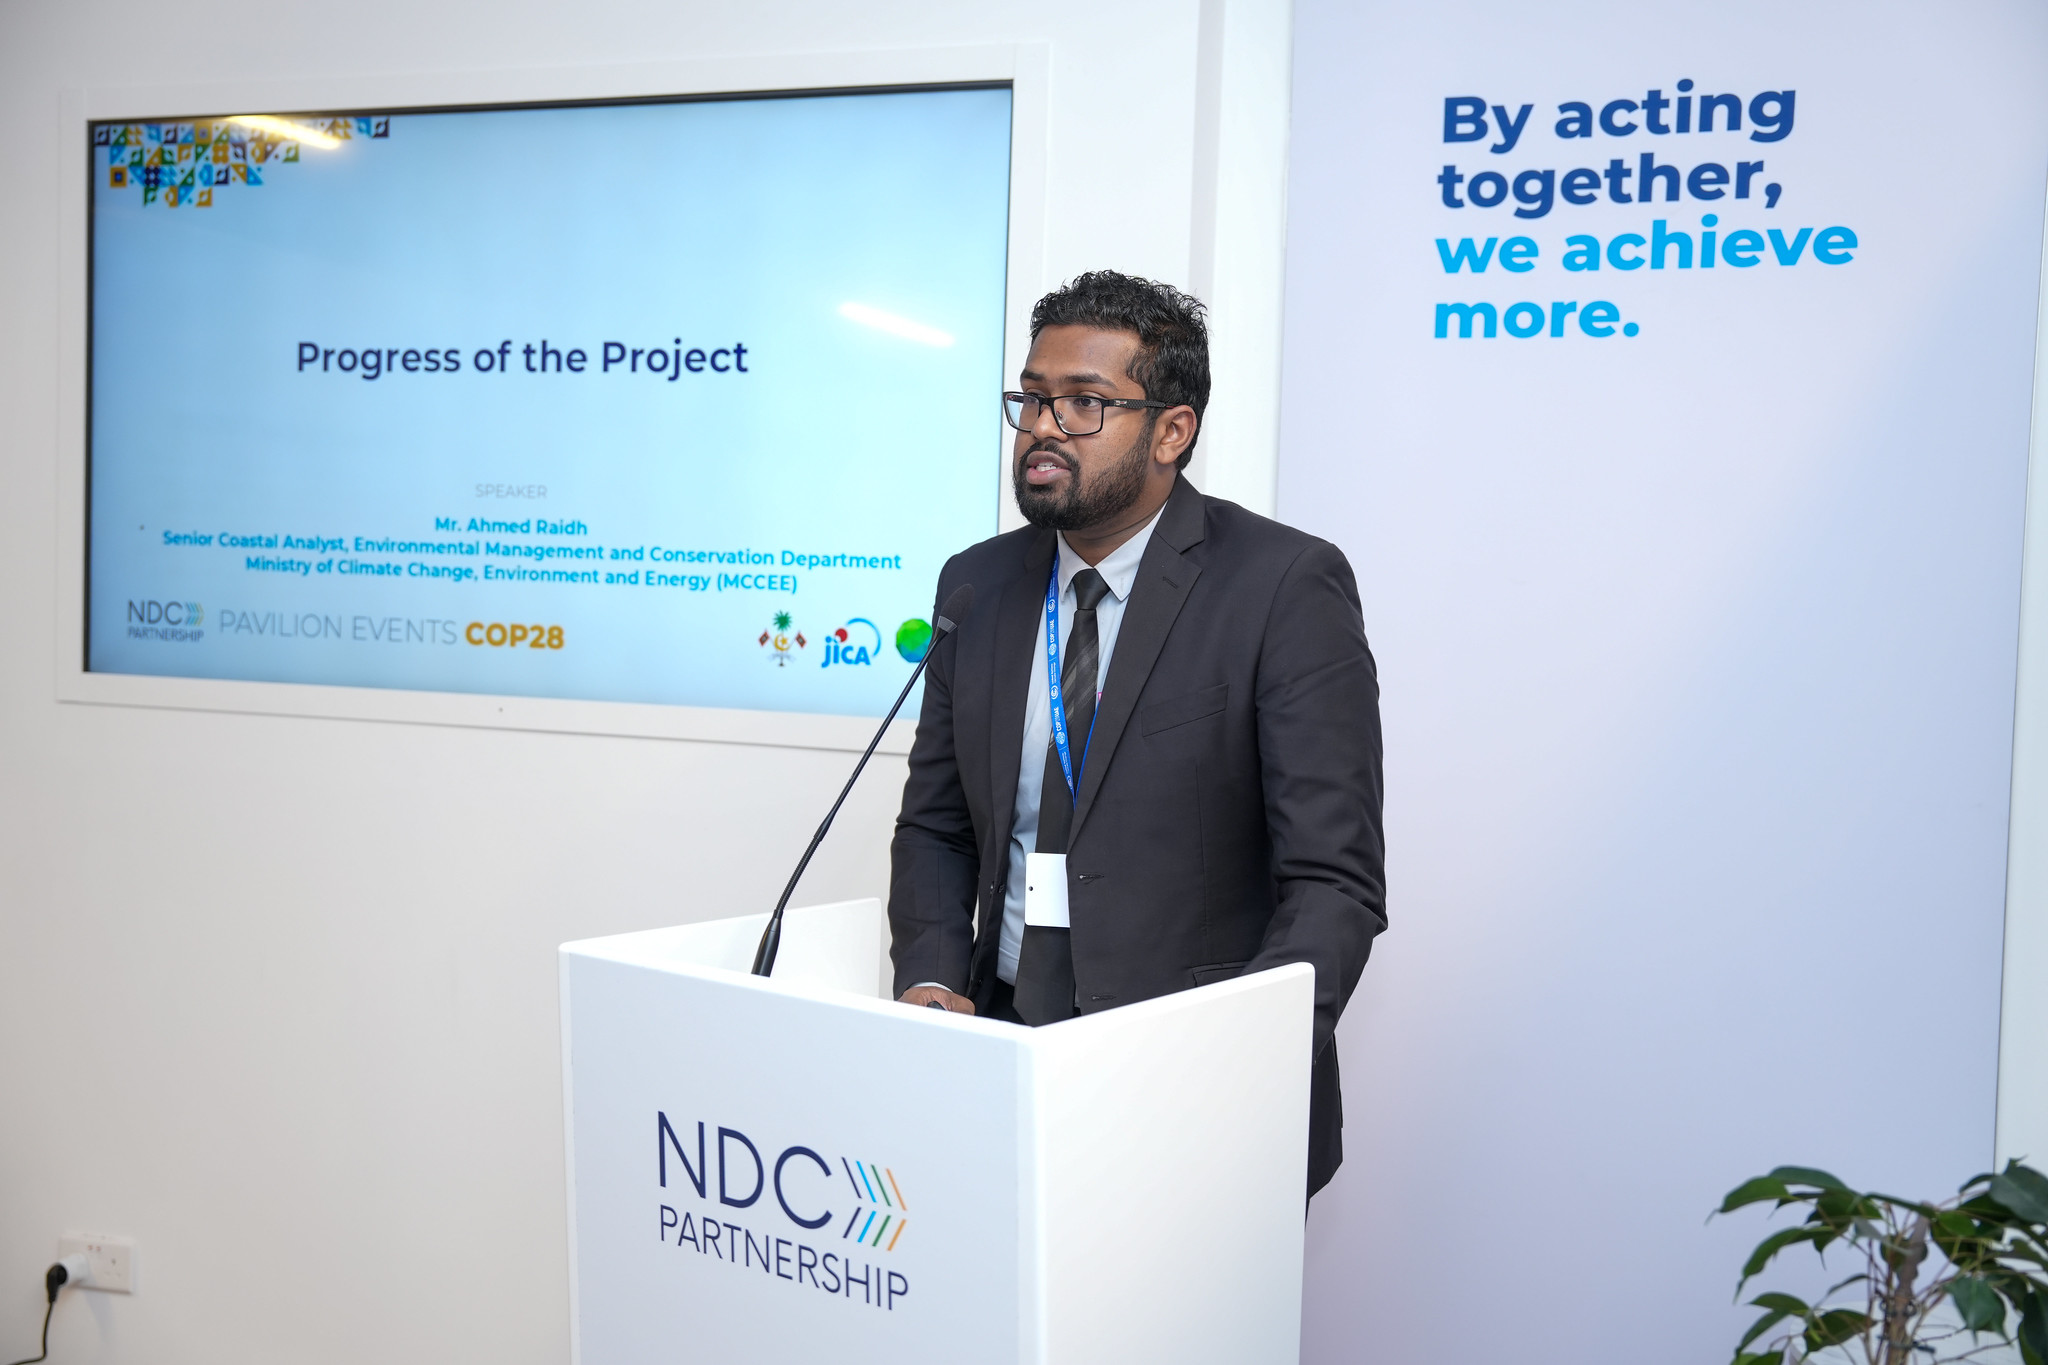 Progress of the Project, Mr. Ahmed Raidh, Ministry of Climate Change, Environment and Energy (MCCEE)